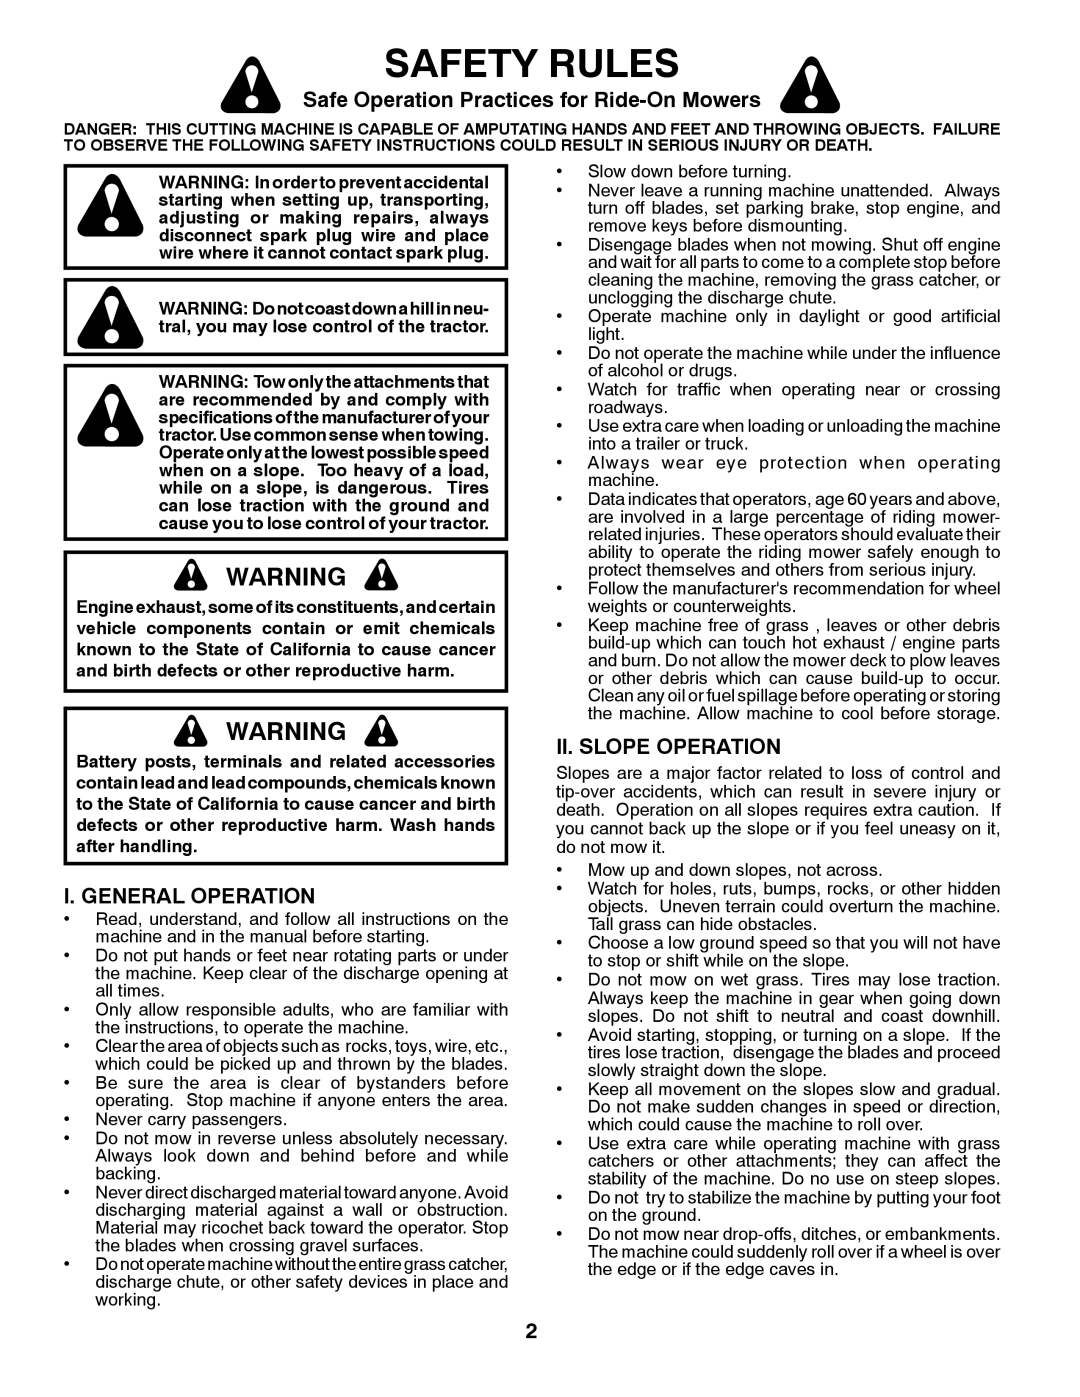 Weed Eater 960480001 Safety Rules, Safe Operation Practices for Ride-On Mowers, I. General Operation, Ii. Slope Operation 